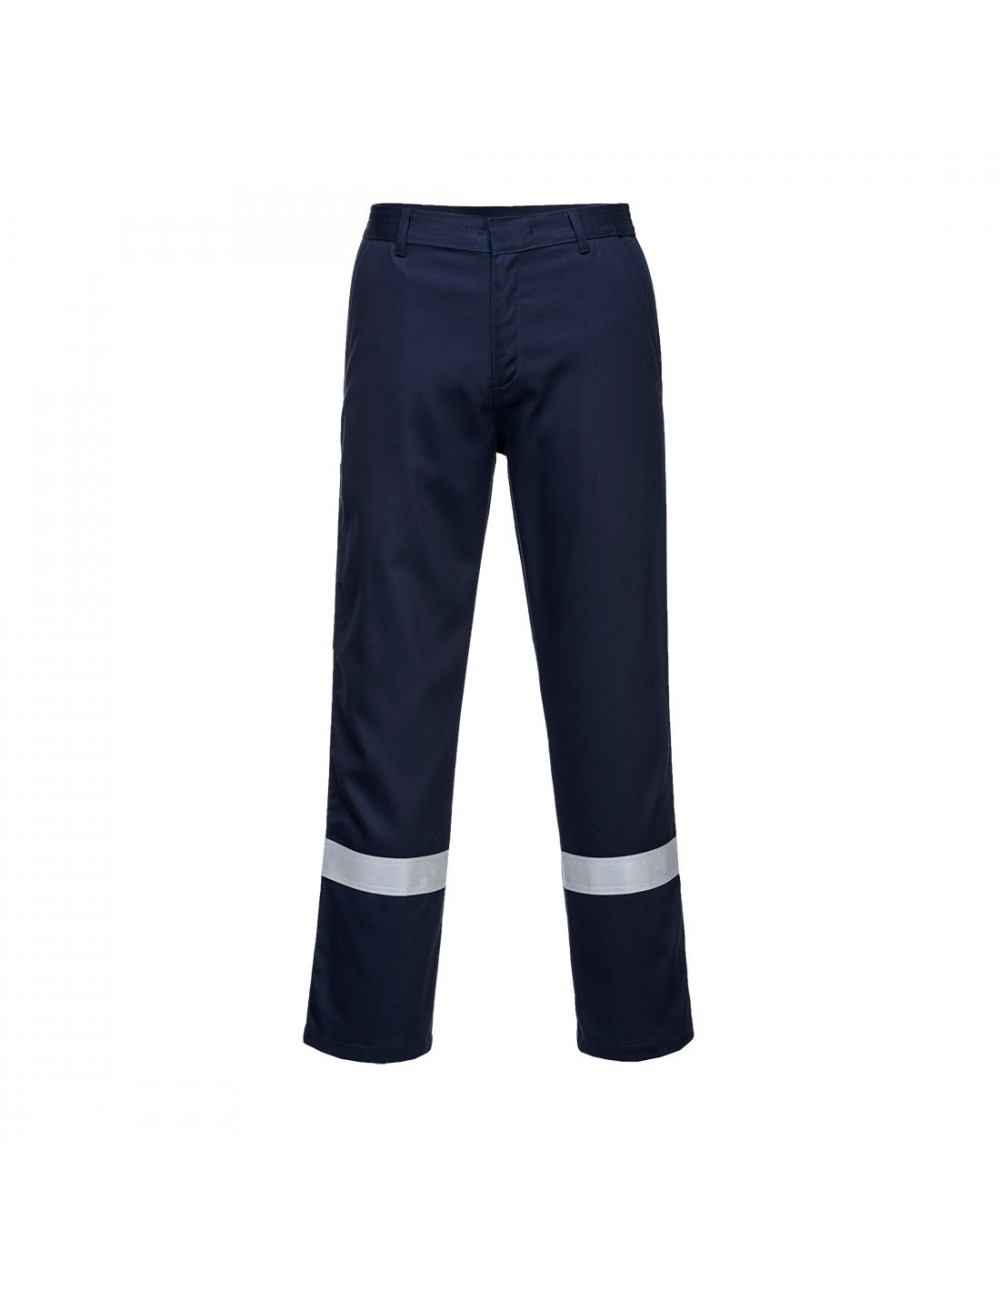 Bizweld iona flame resistant trousers navy Portwest